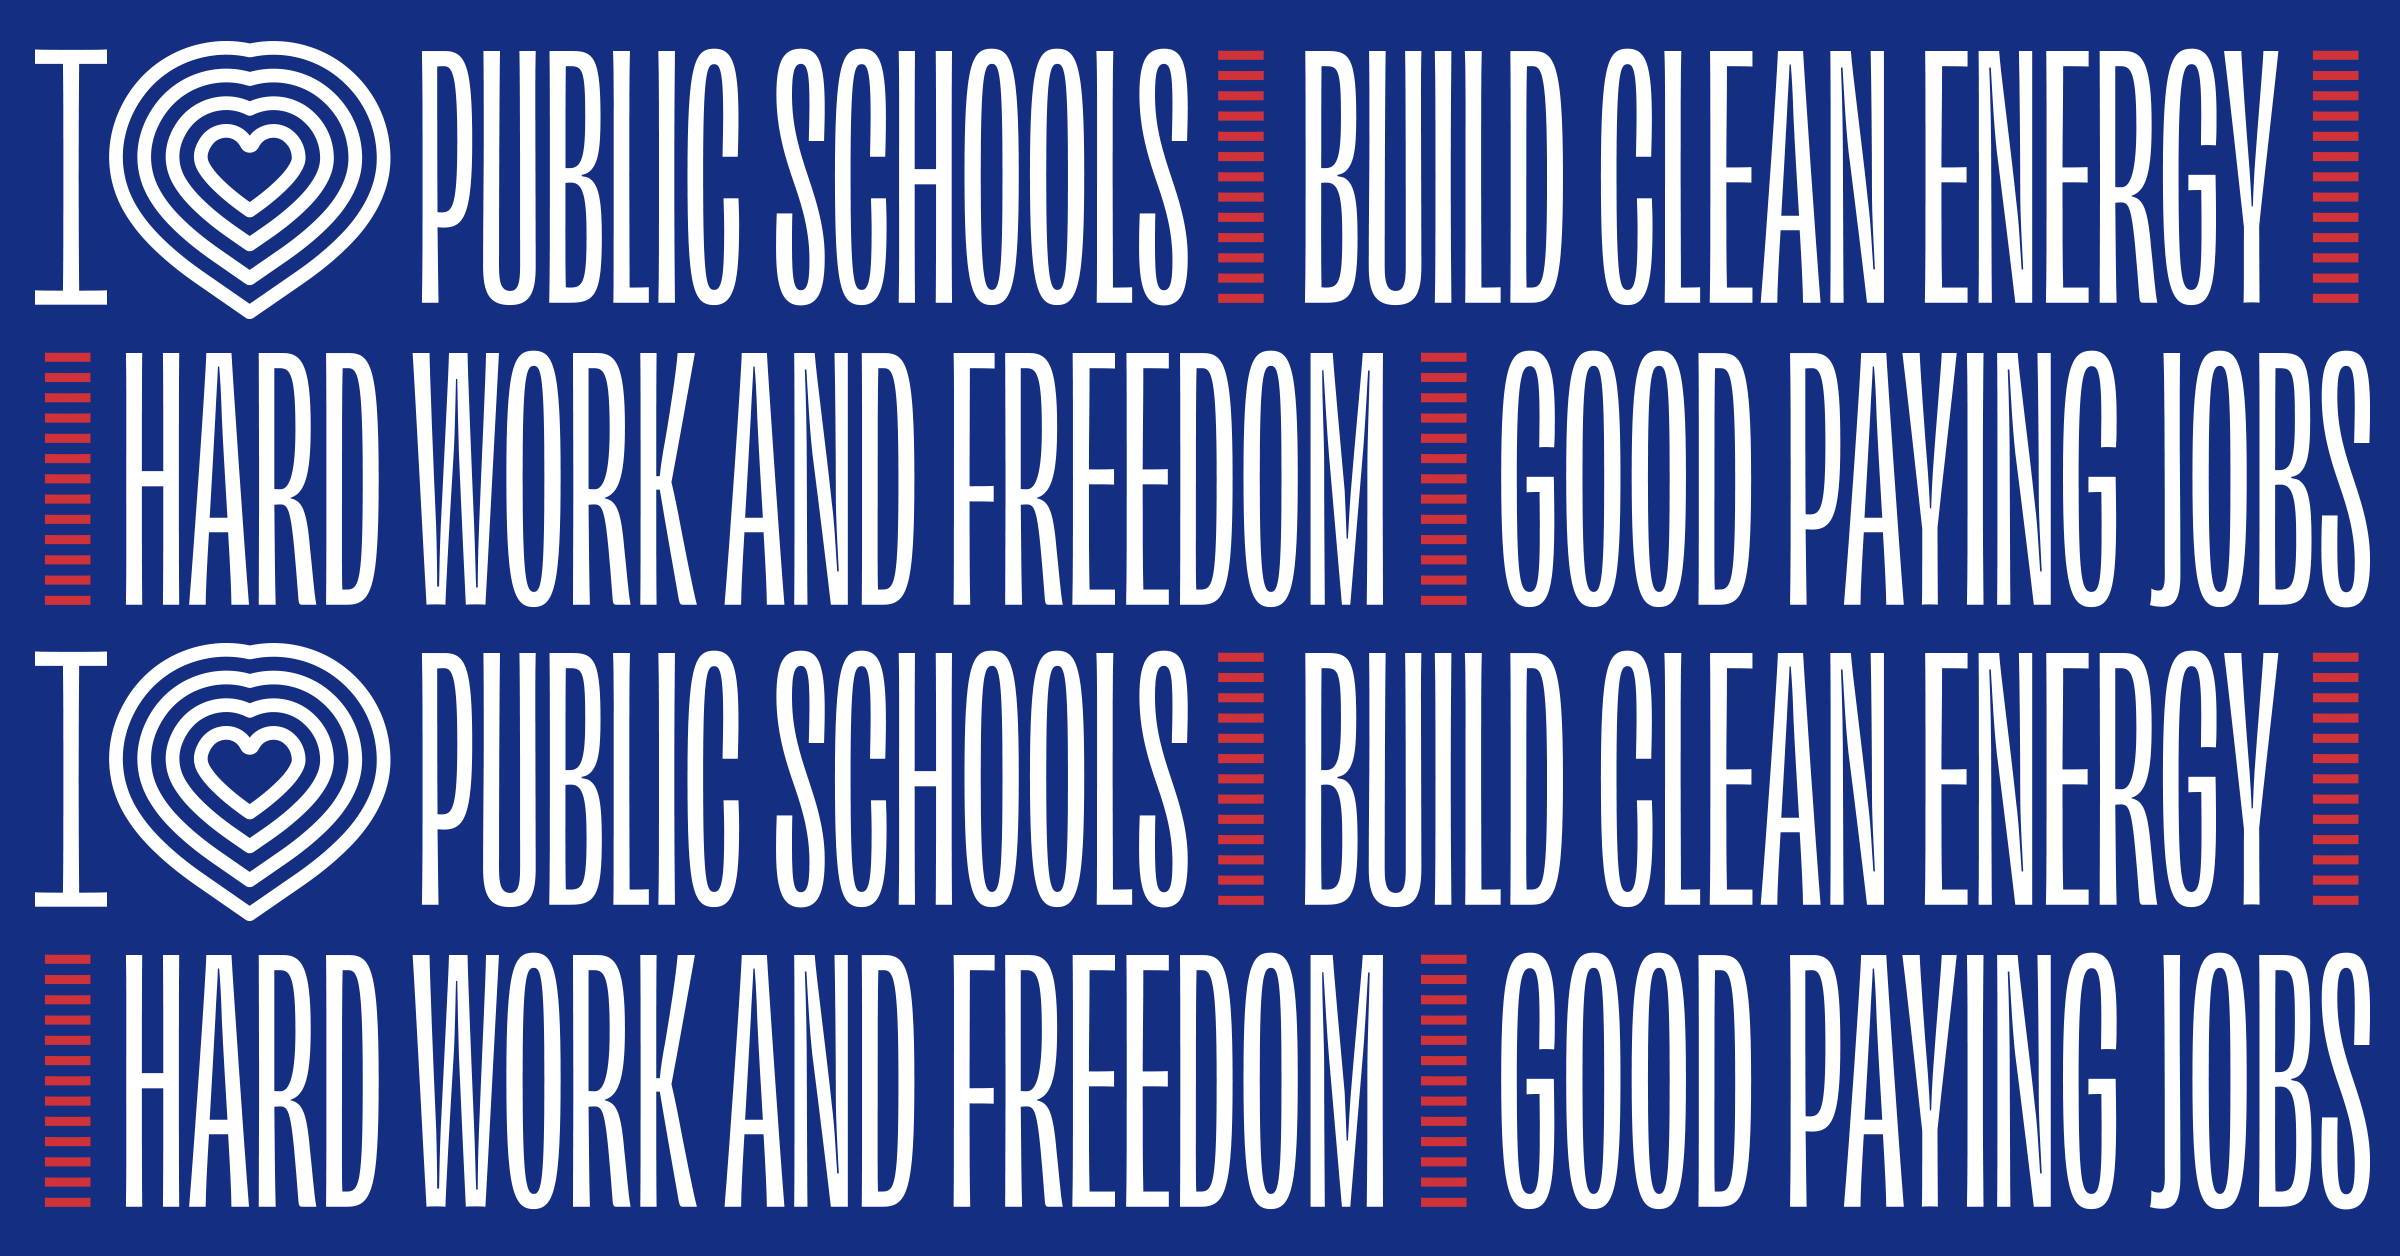 Rows of condensed type that says I HEART PUBLIC SCHOOLS / BUILD CLEAN ENERGY / HARD WORK AND FREEDOM / GOOD PAYING JOBS